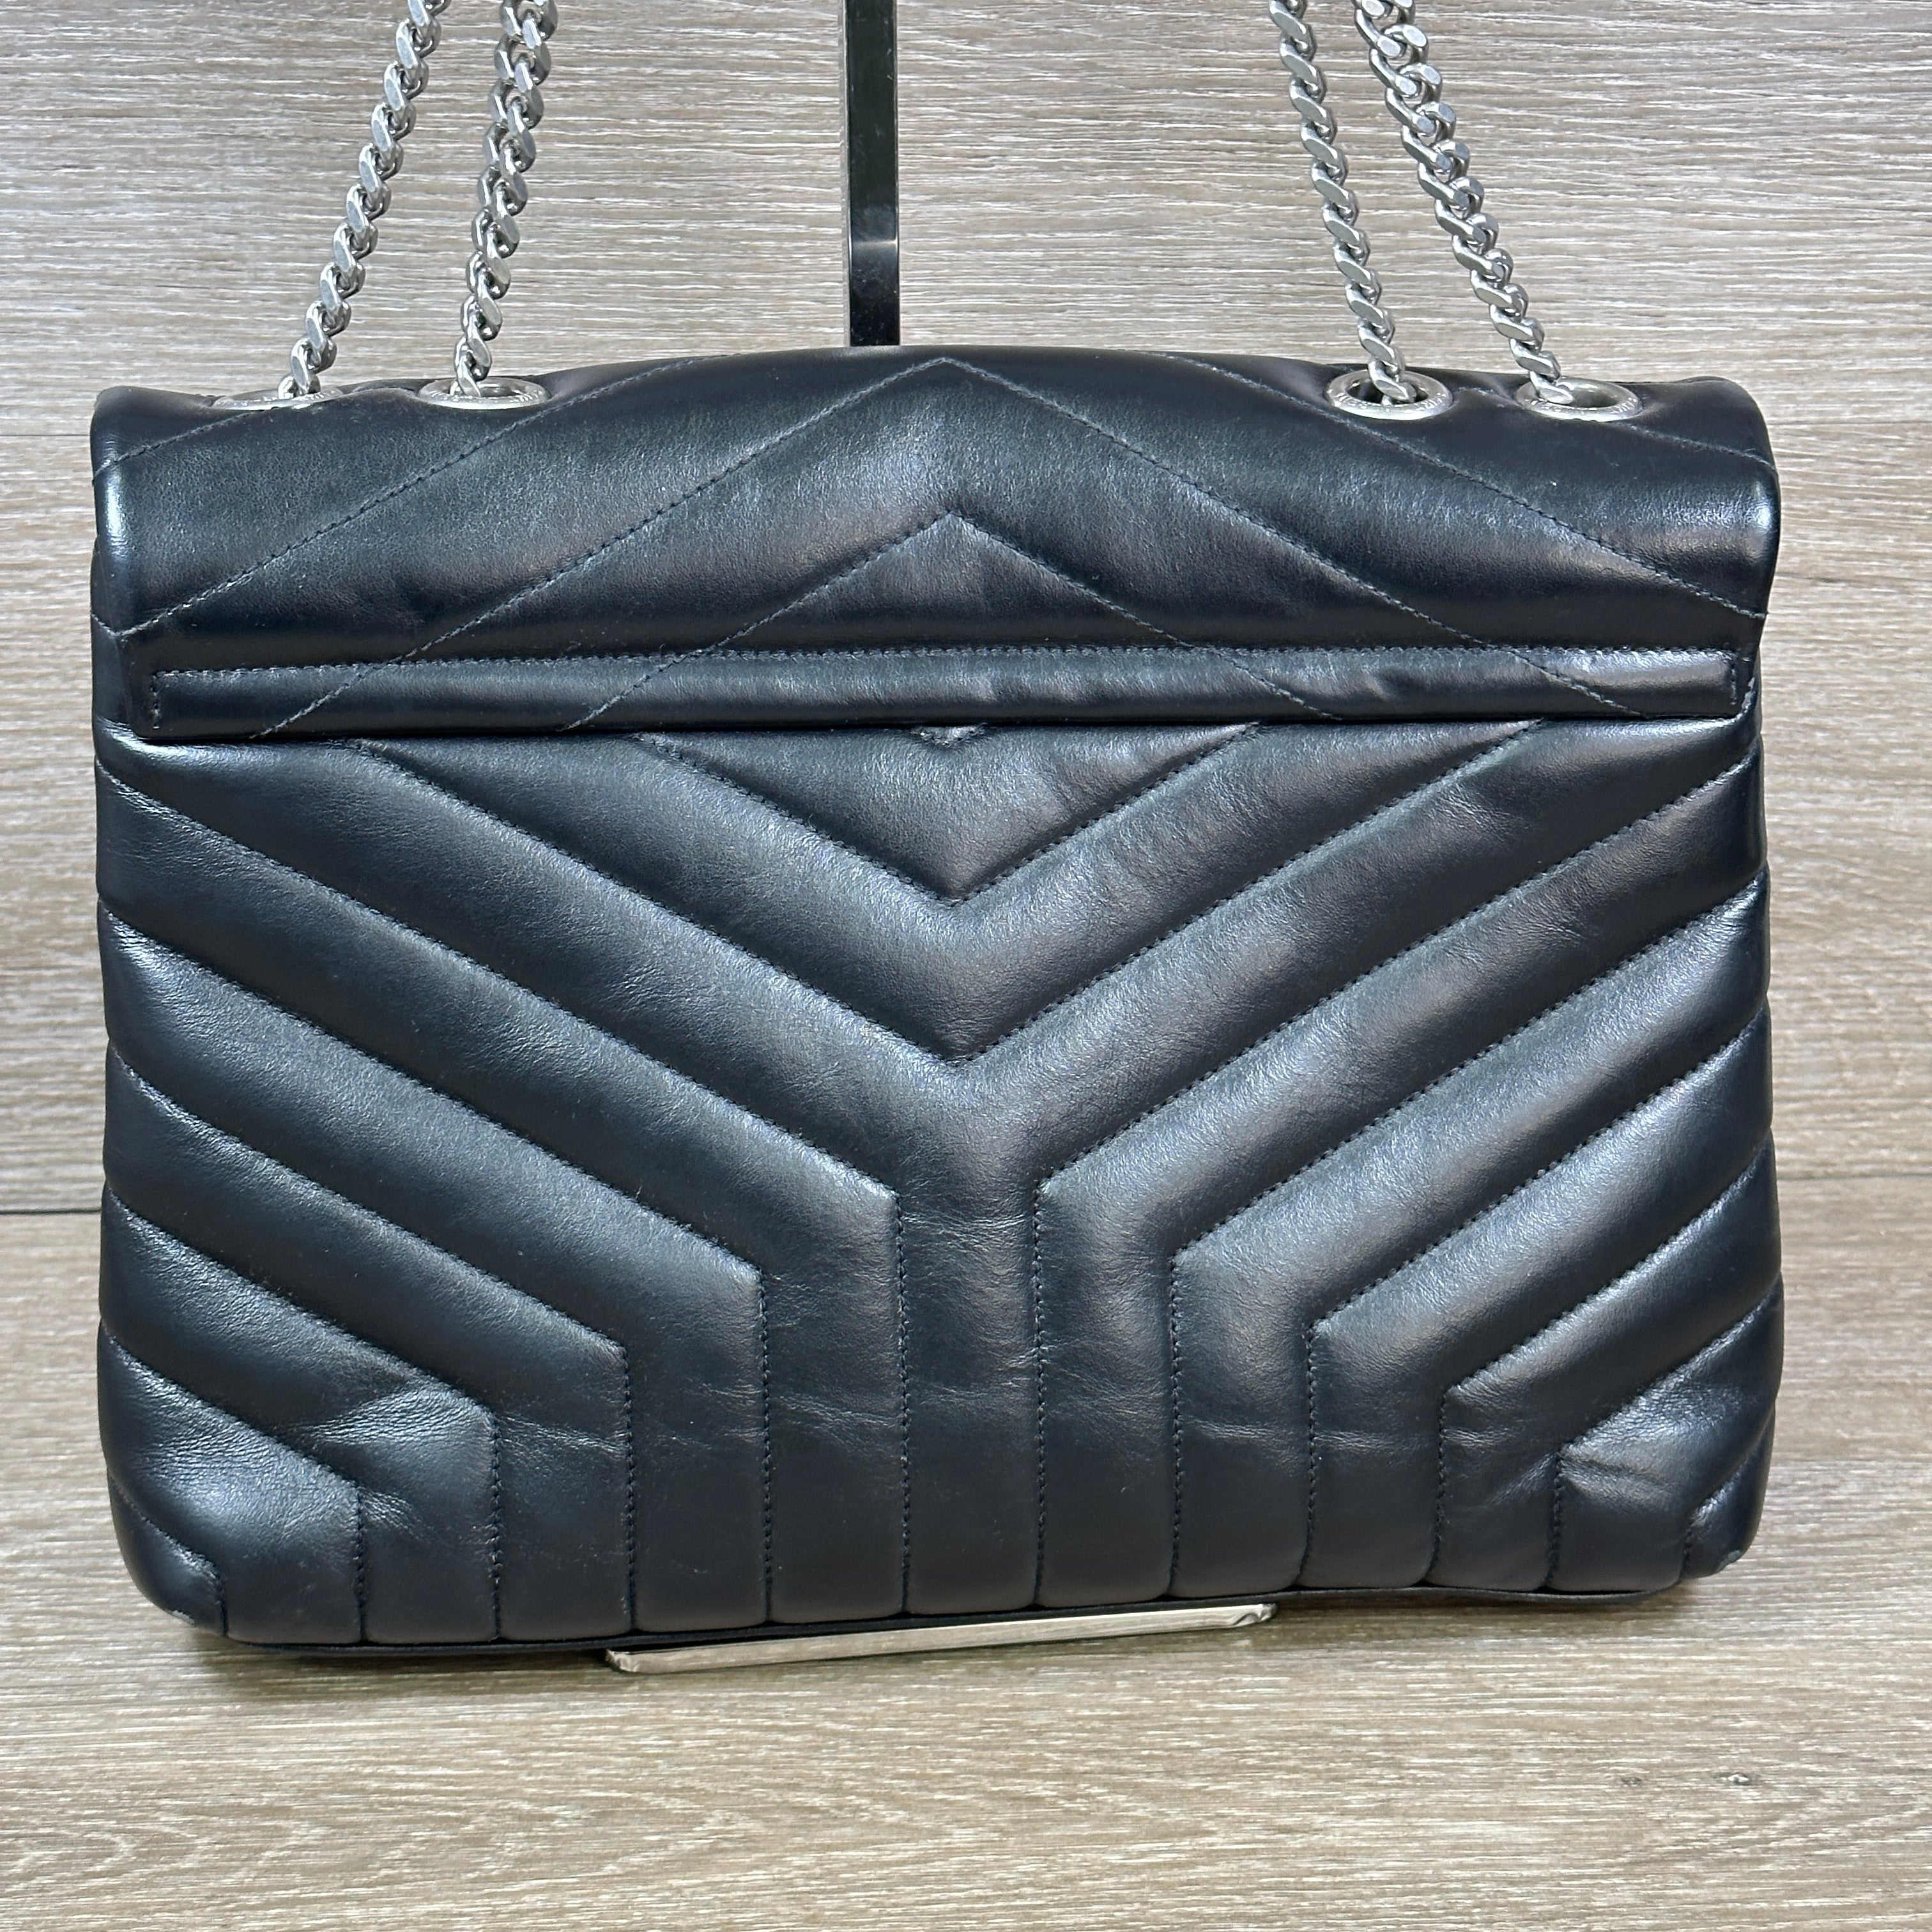 Large Ysl Bag, Shop The Largest Collection